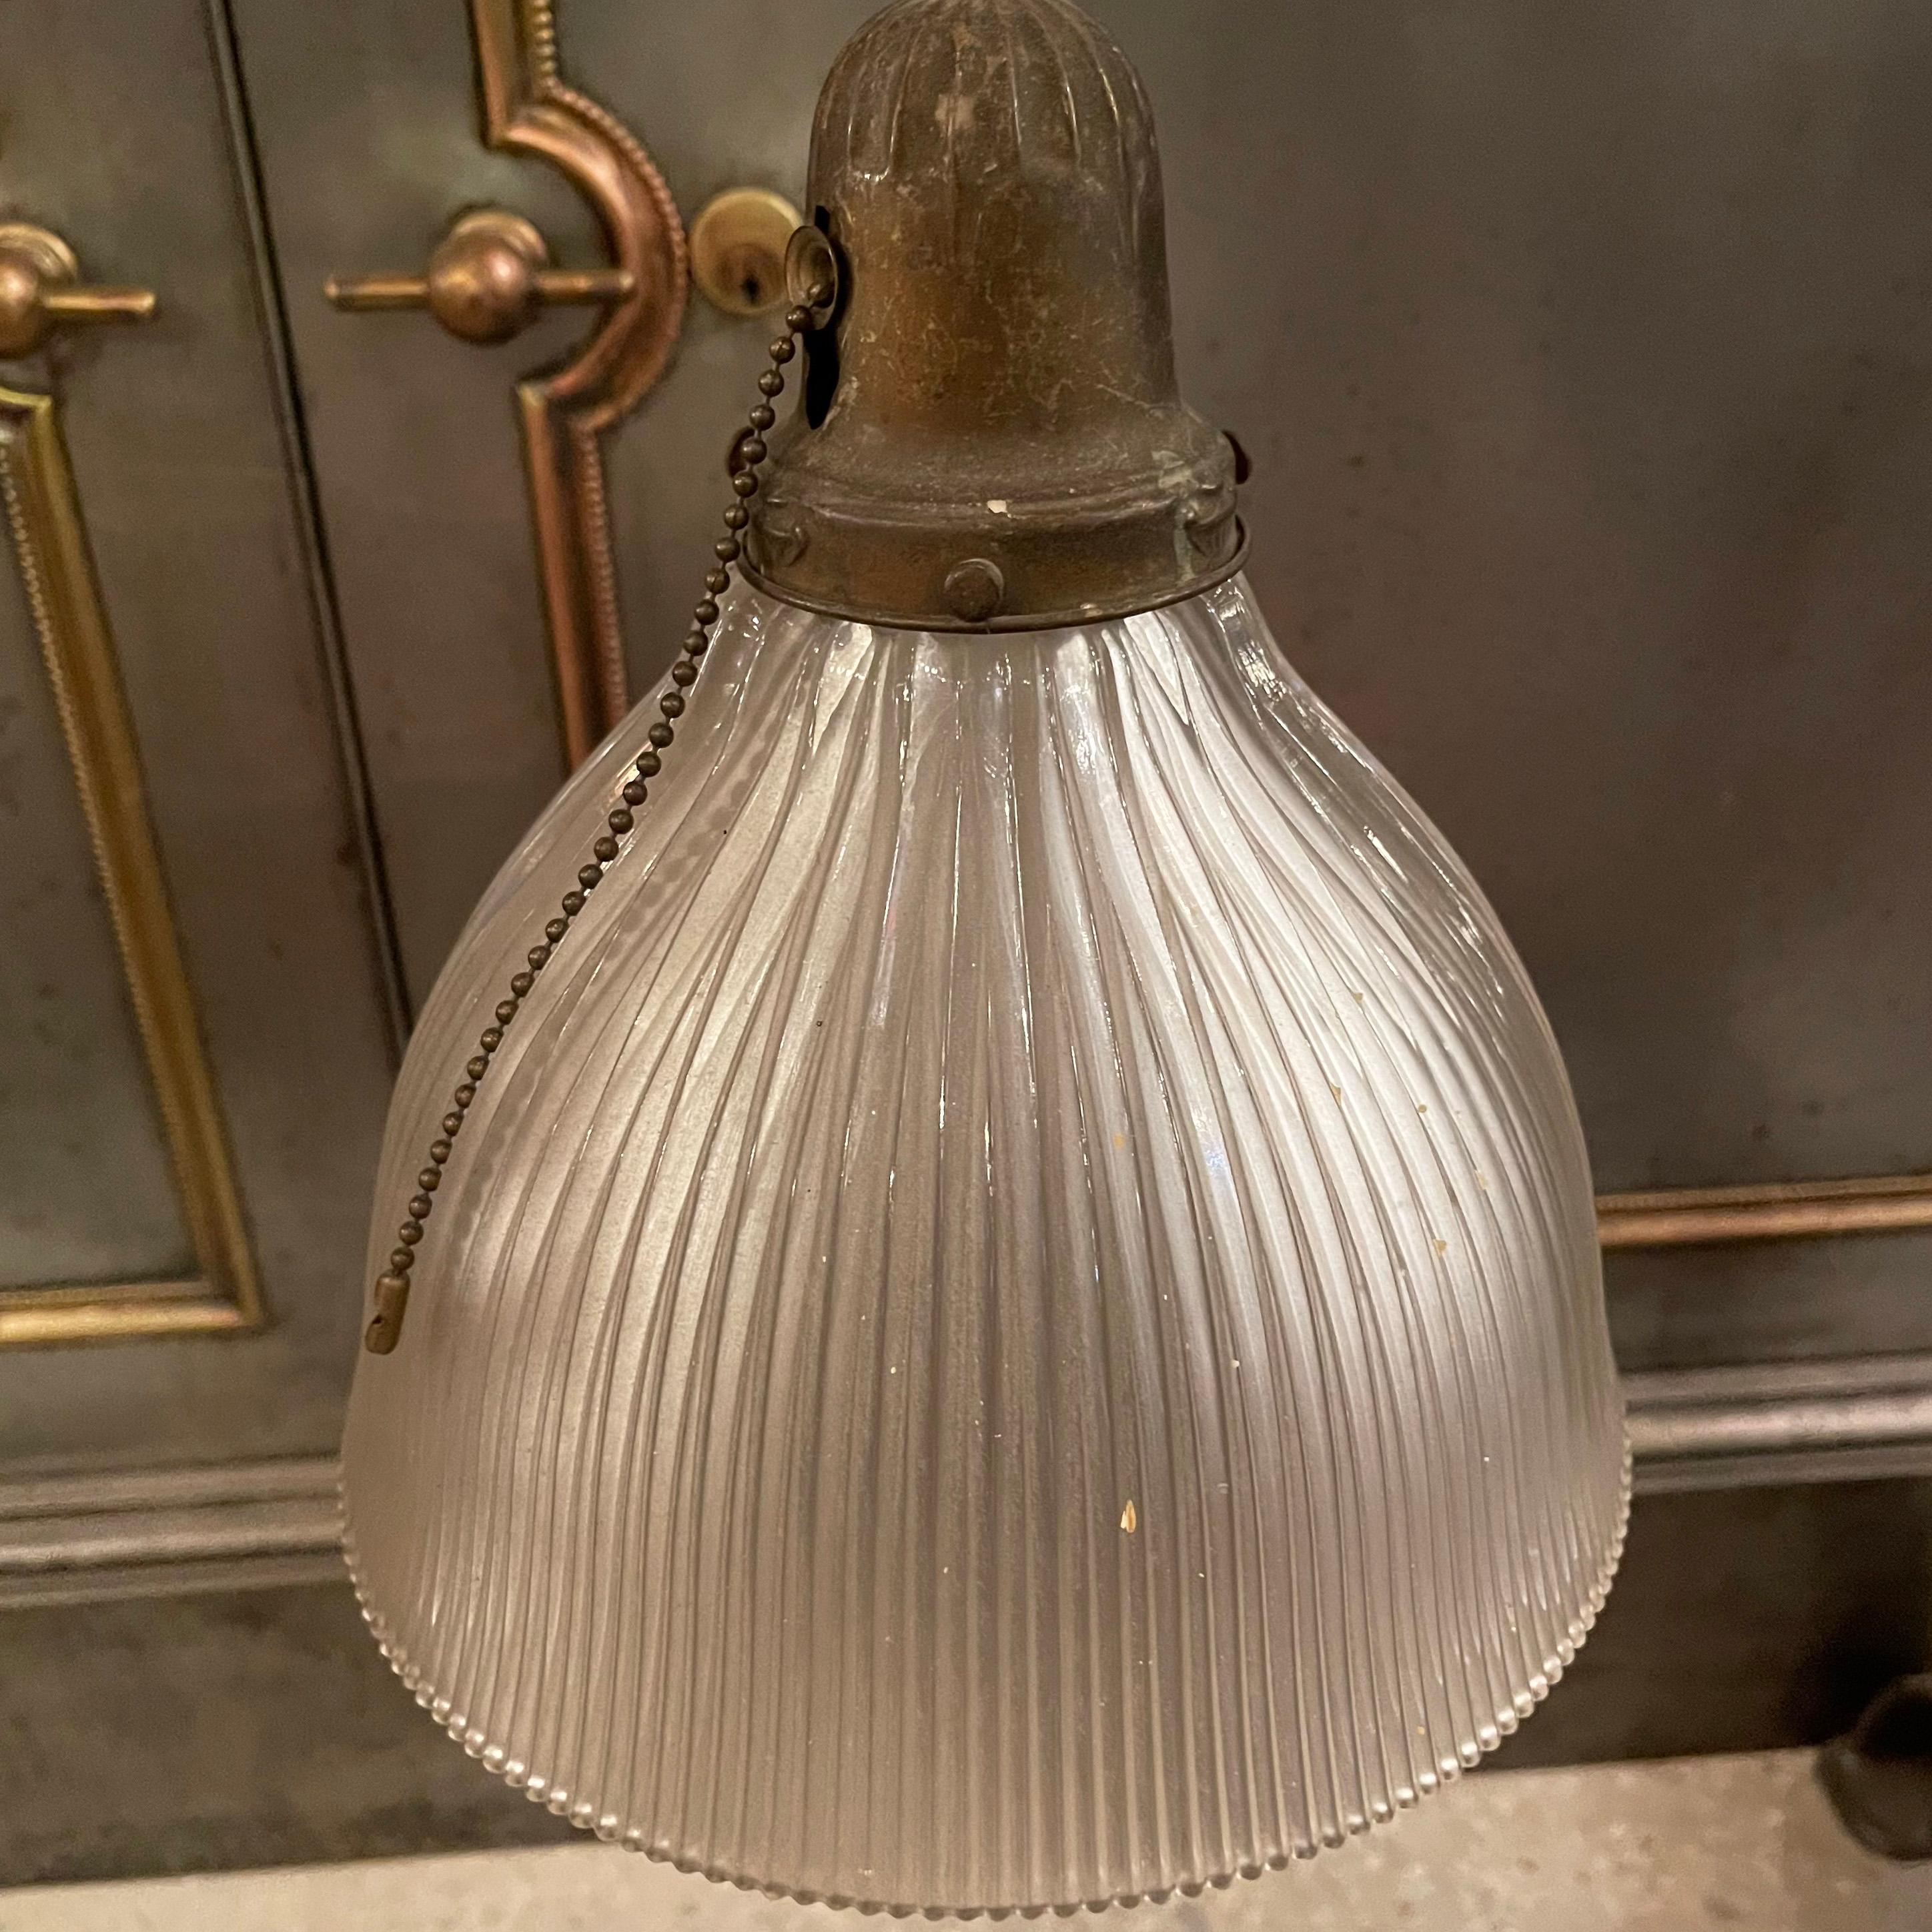 Brass Early 20th Century Industrial Cut Glass Dome Pendant Light For Sale